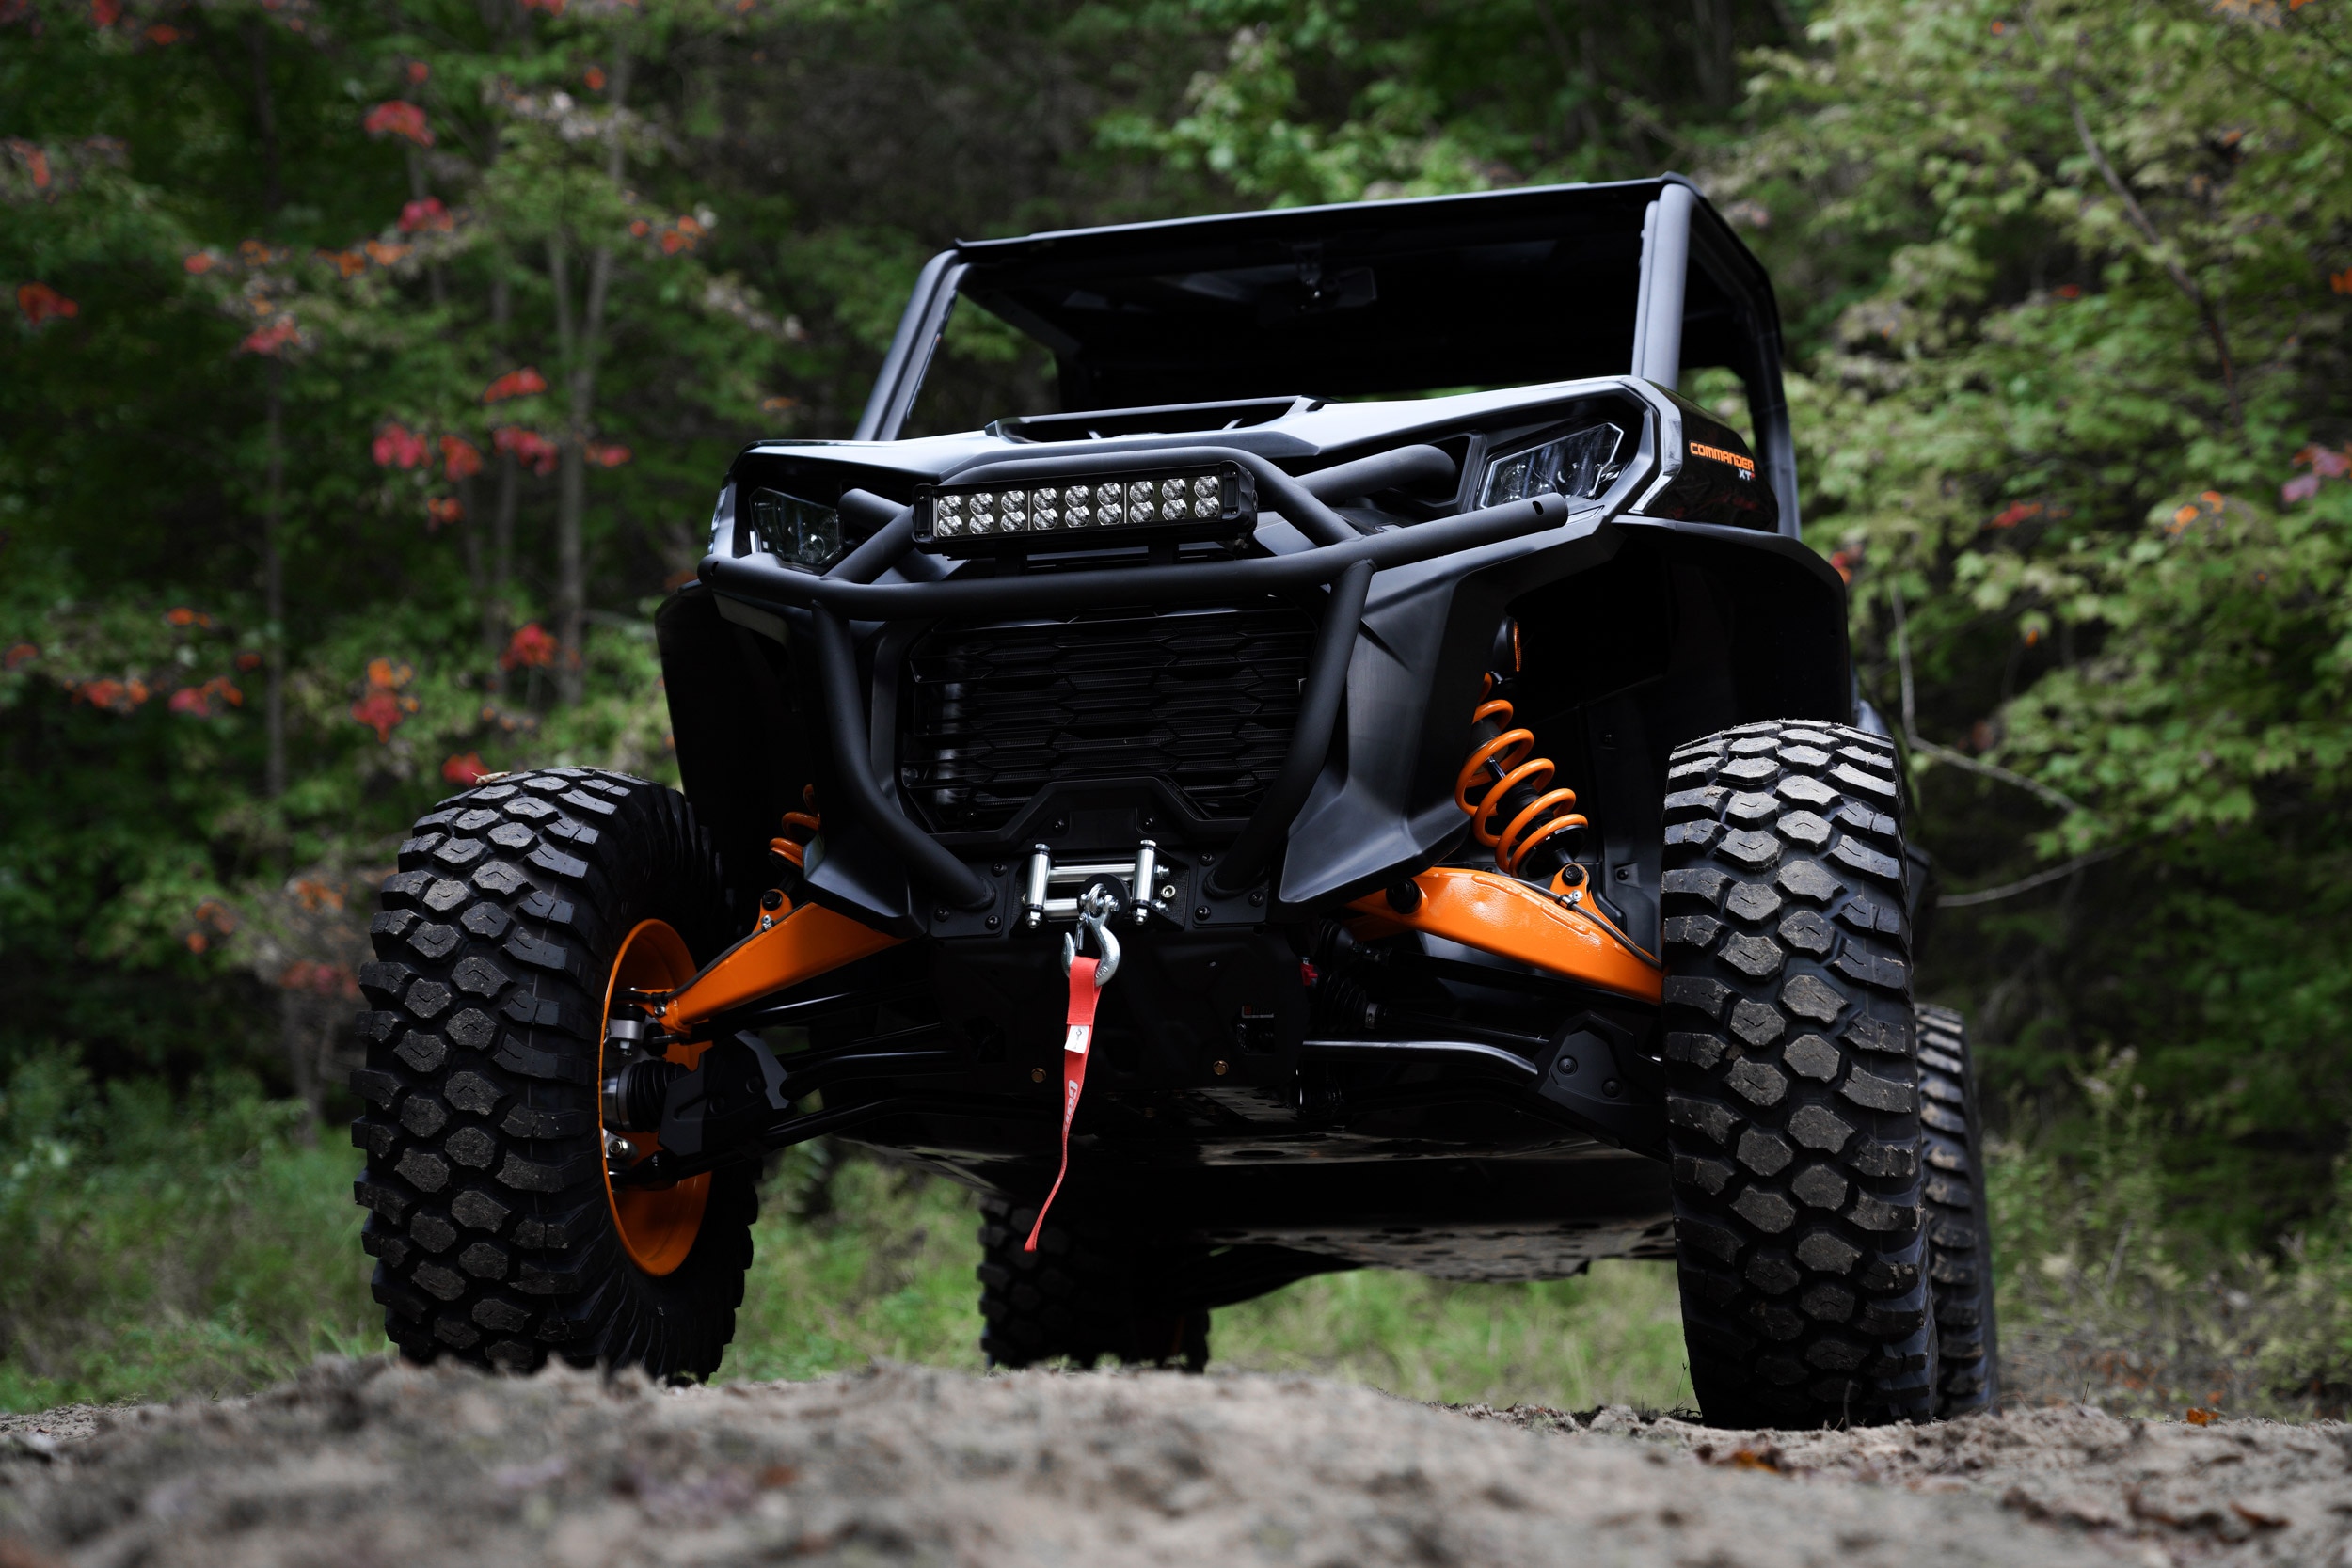 2022 Can-Am Commander Side by side vehicle with versatile XPS tires